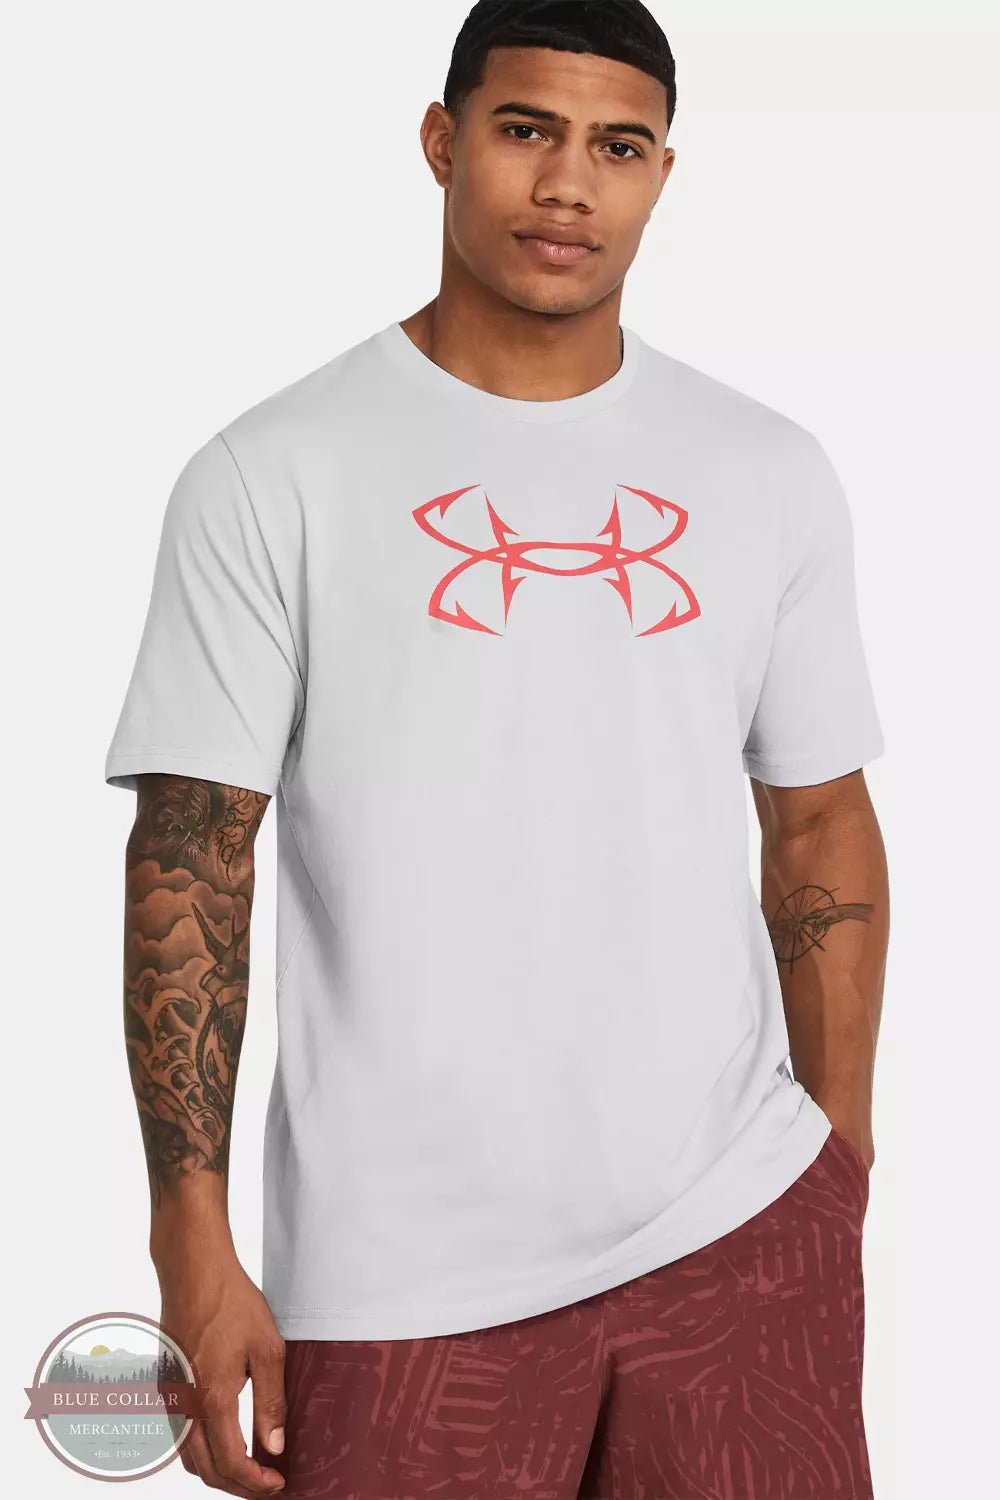 Under Armour 1331197 Fish Hook Logo Short Sleeve T-Shirt Halo Gray Front View